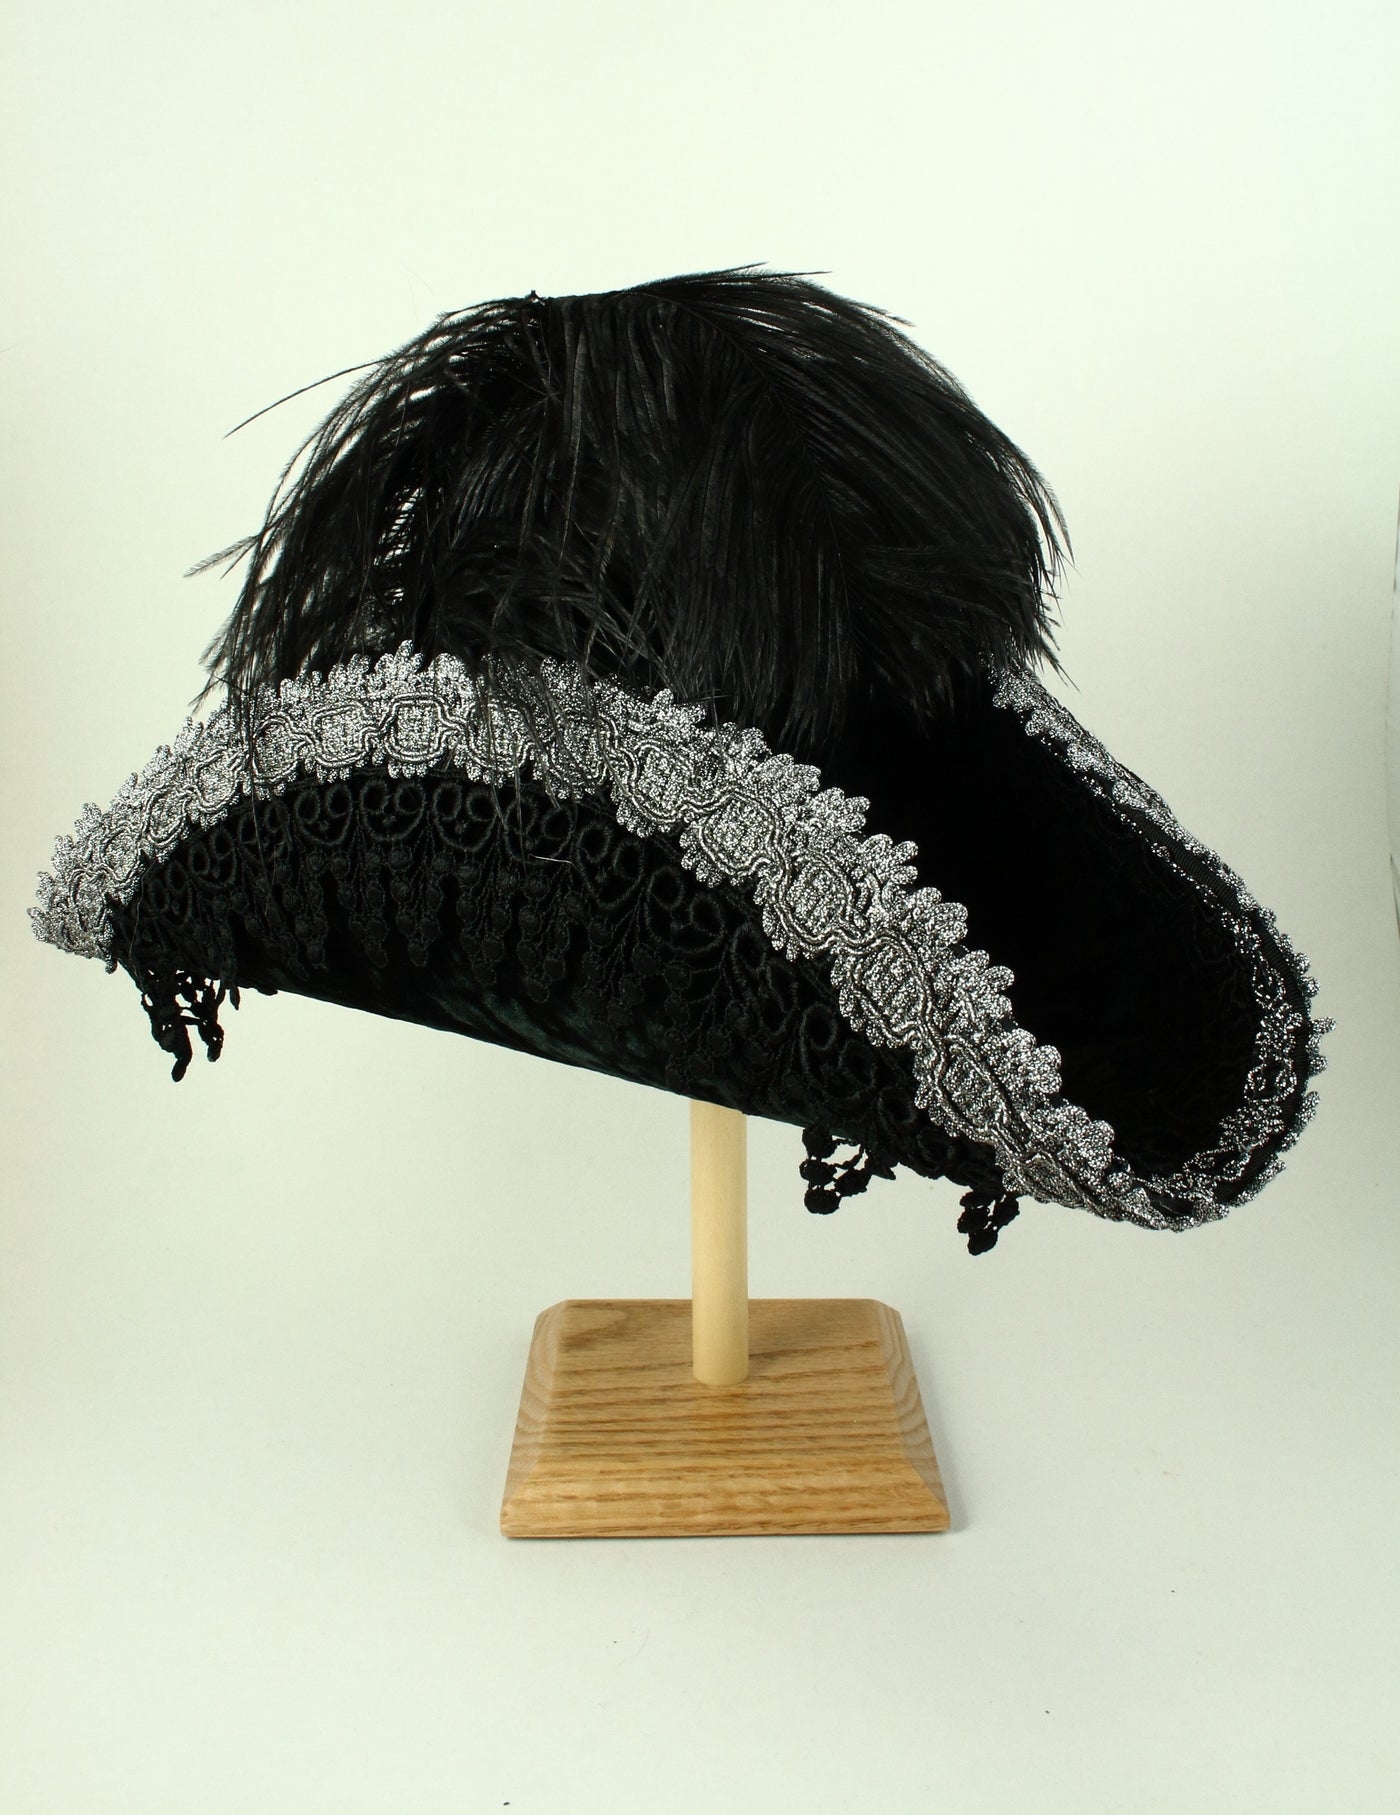 Pirate Hat - Black / Silver / Black Lace - Tall Toad